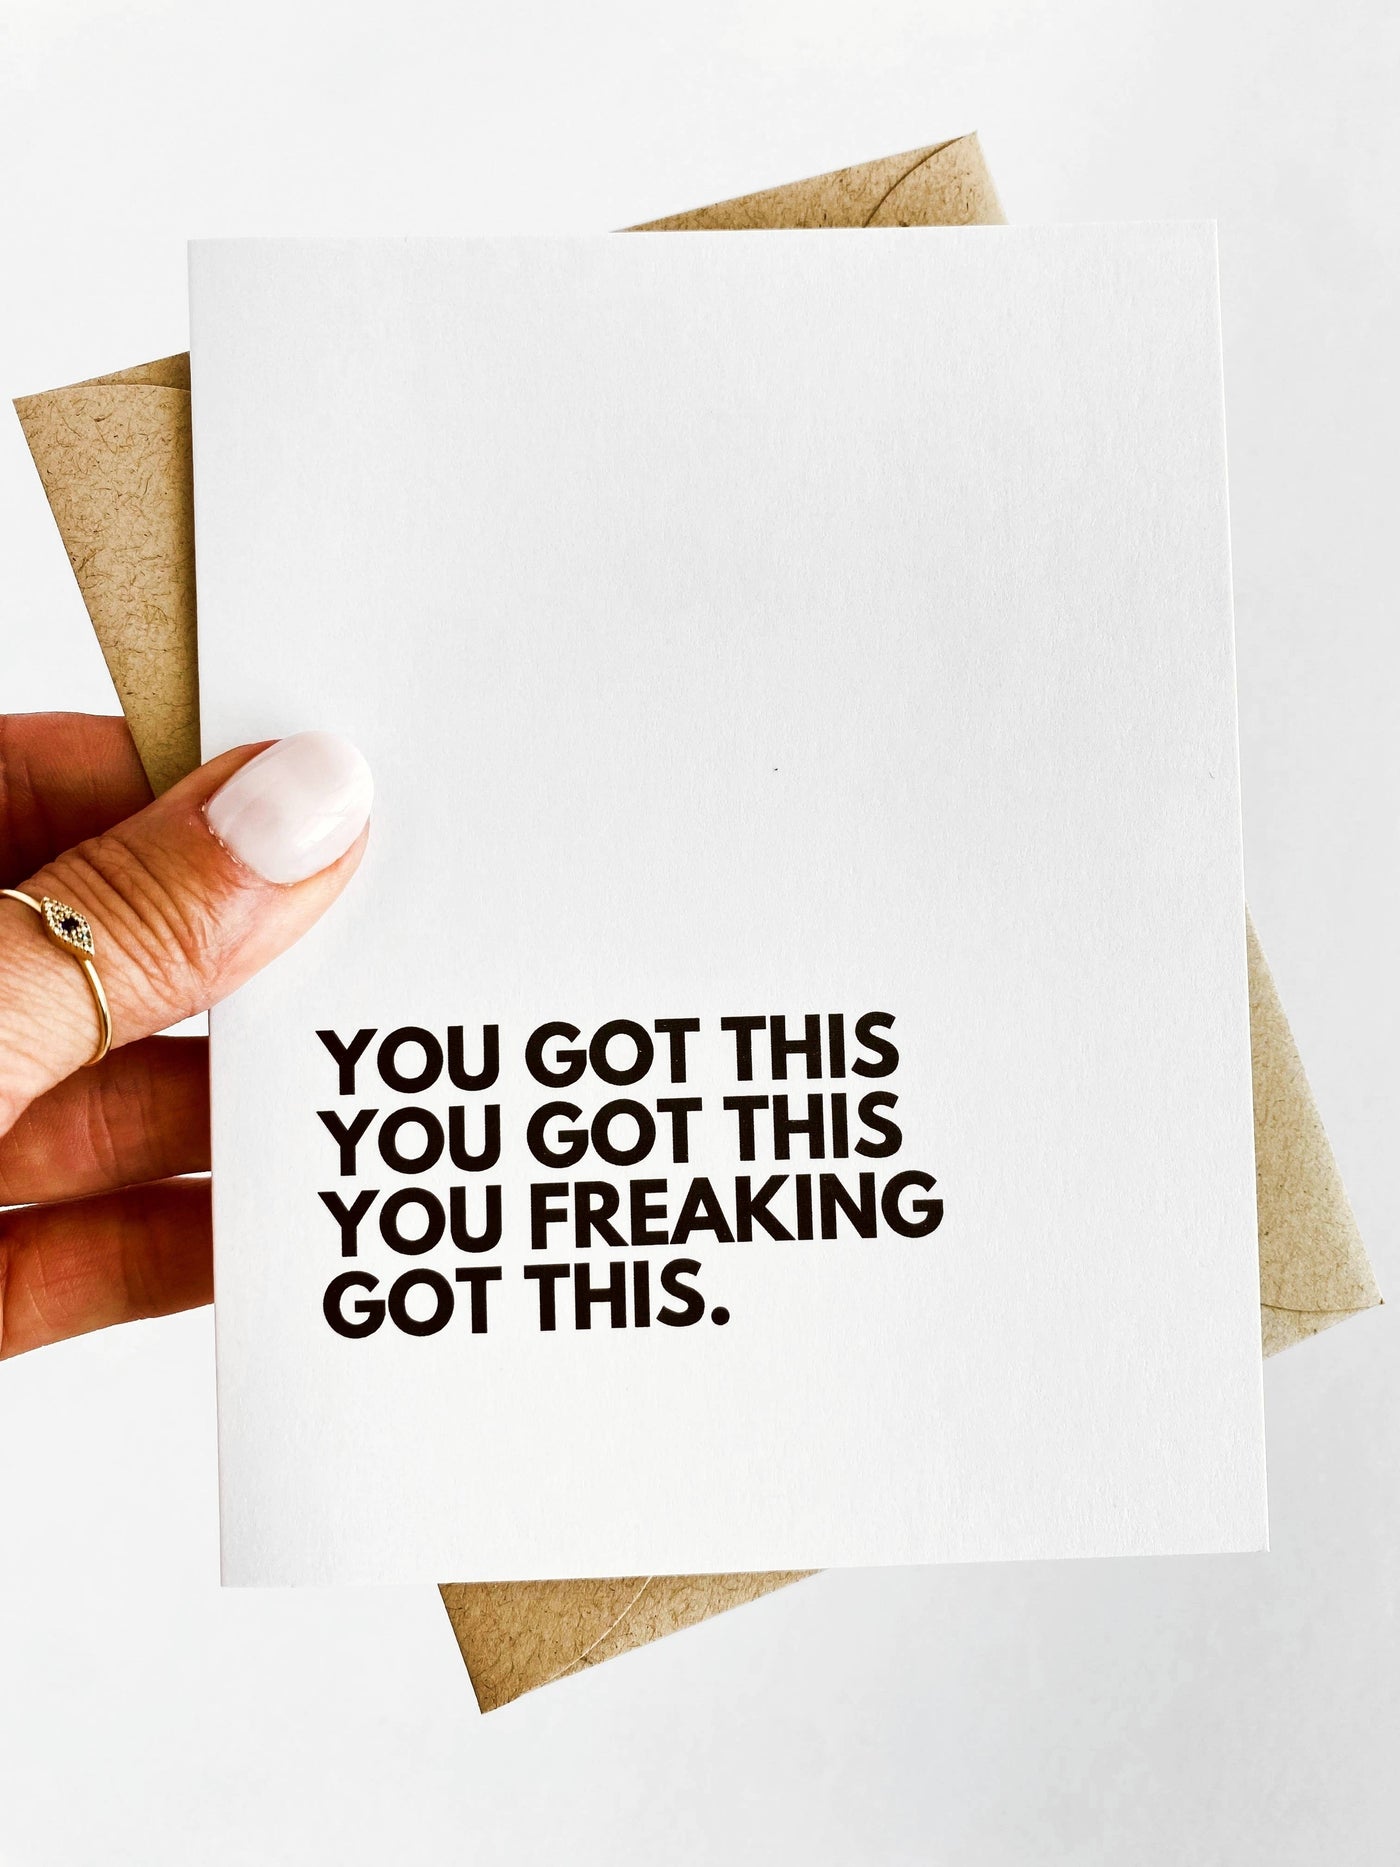 Five Dot Post - You Got This You Freaking Got This Encouragement Card